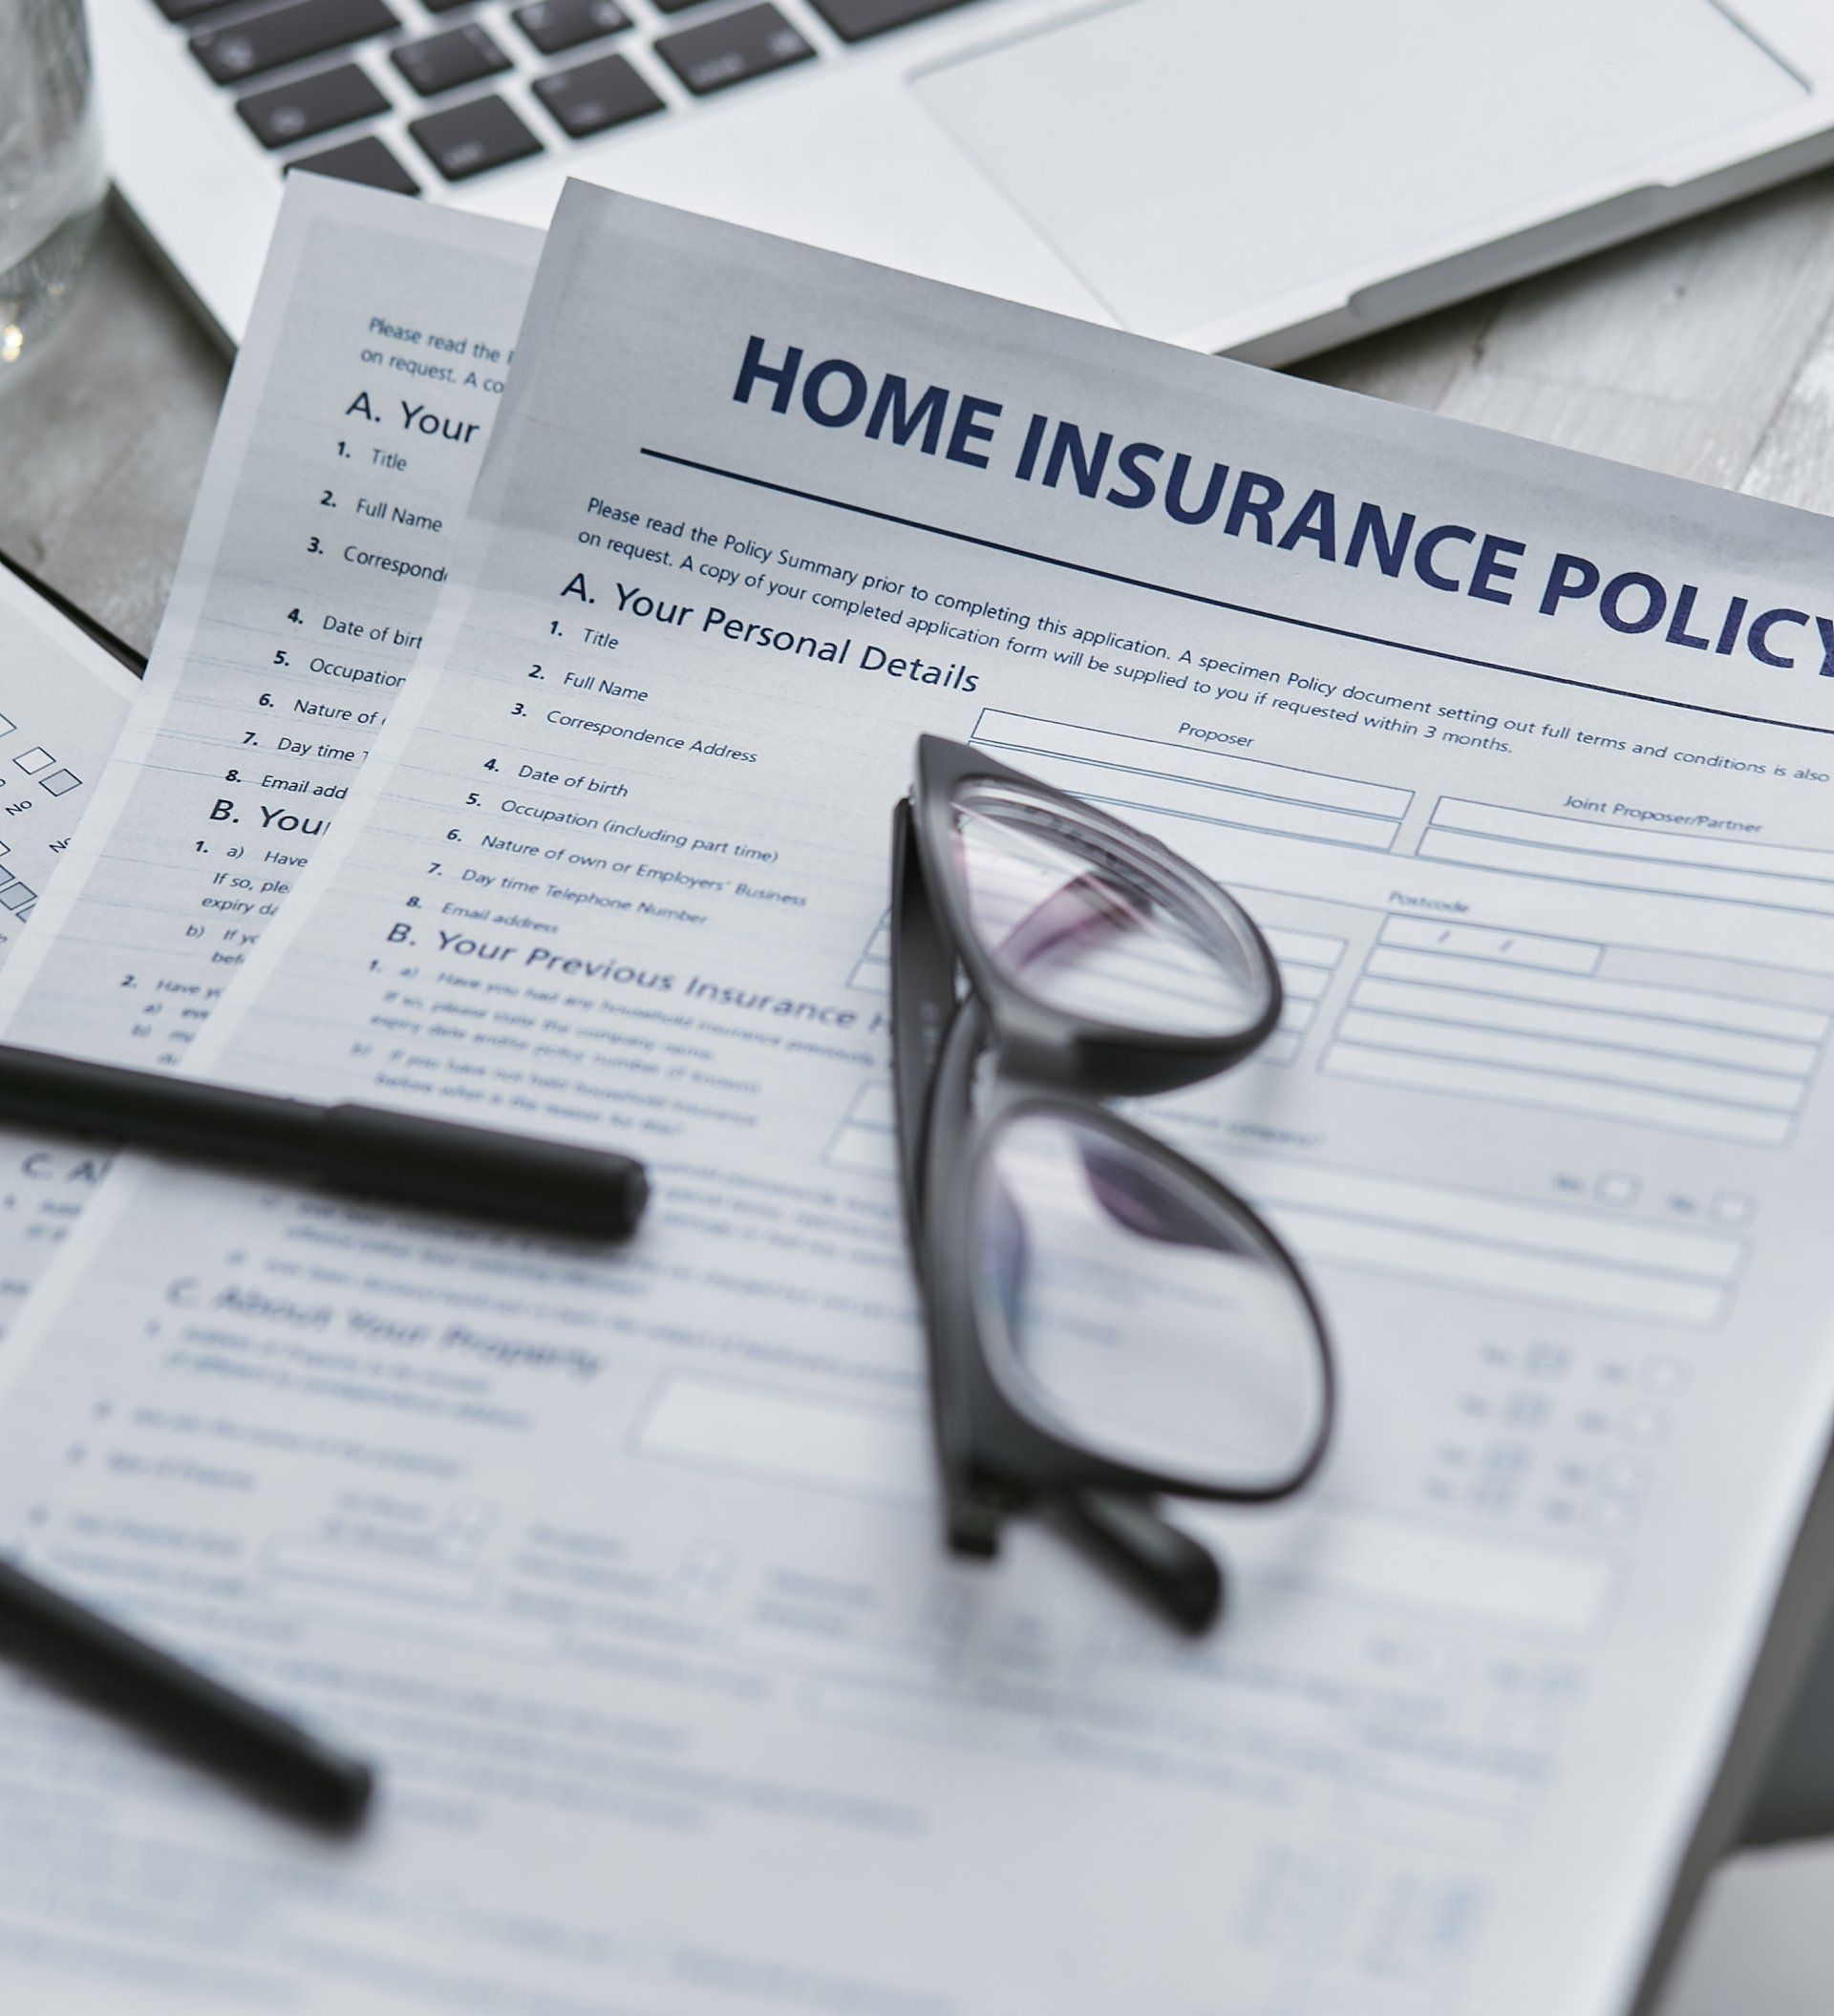 Home Insurance Policy form being filled out